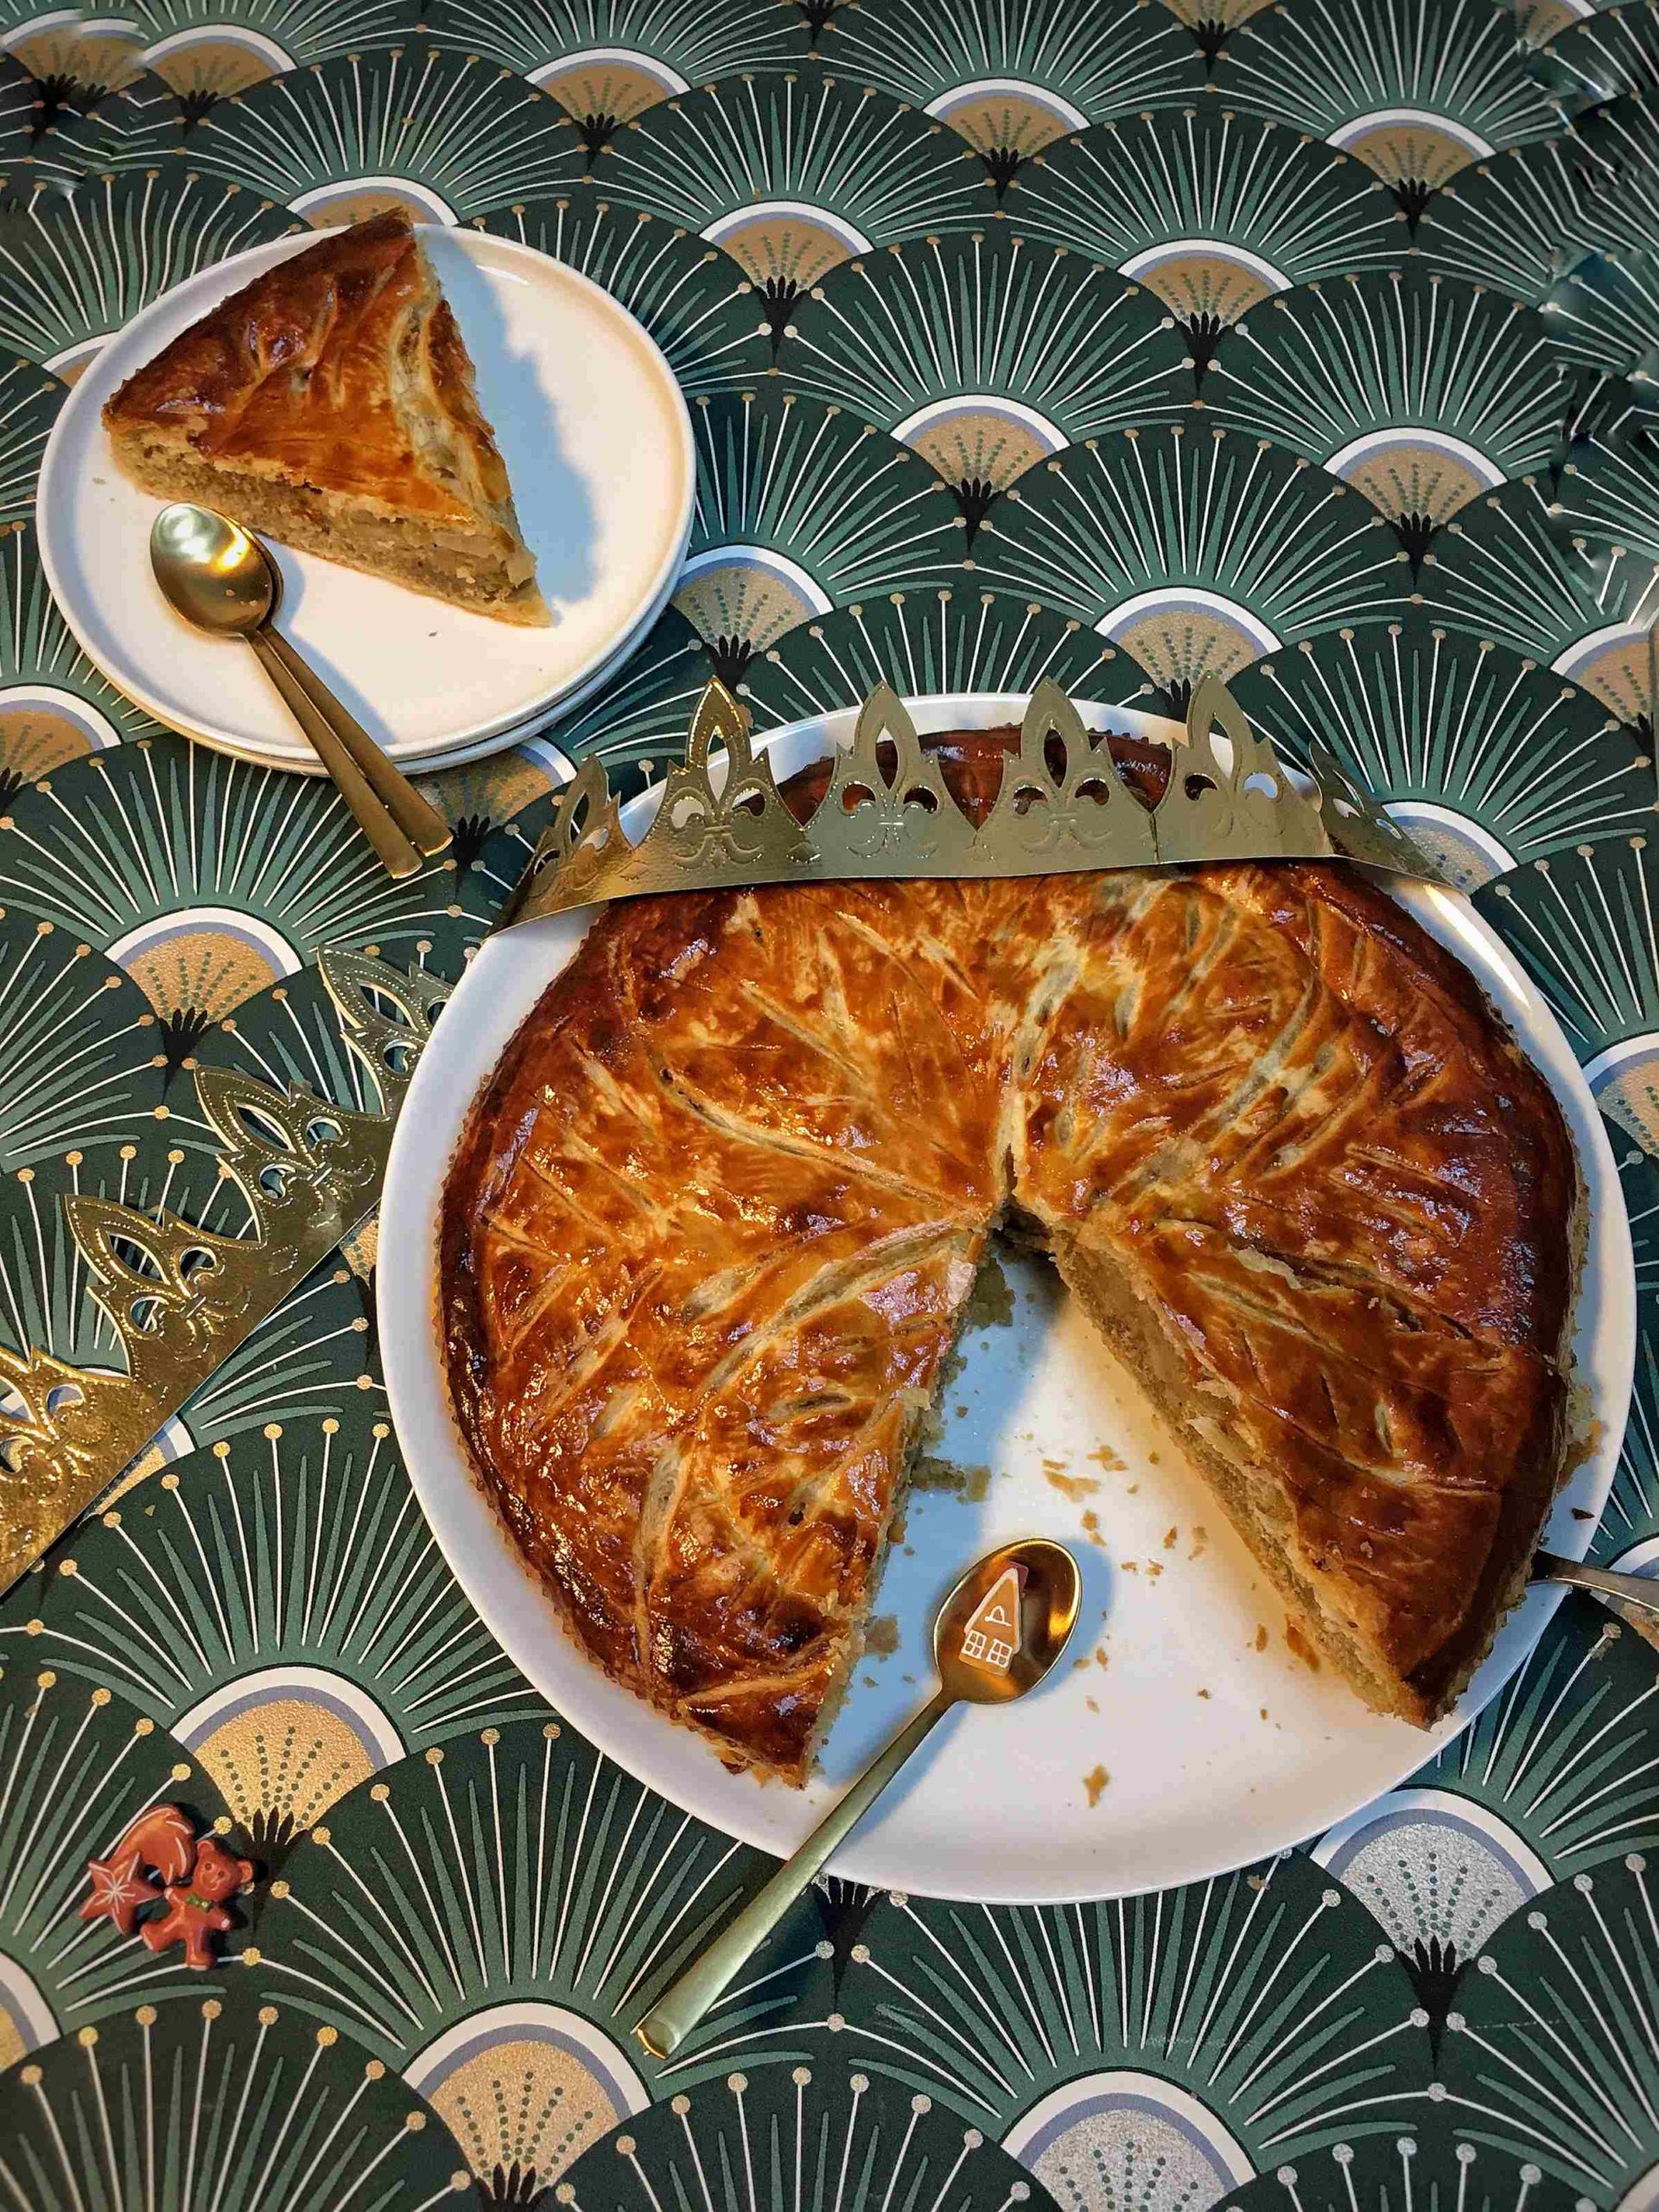 Galette des Rois with caramel pears and Madagascar vanilla Beurre Bordier